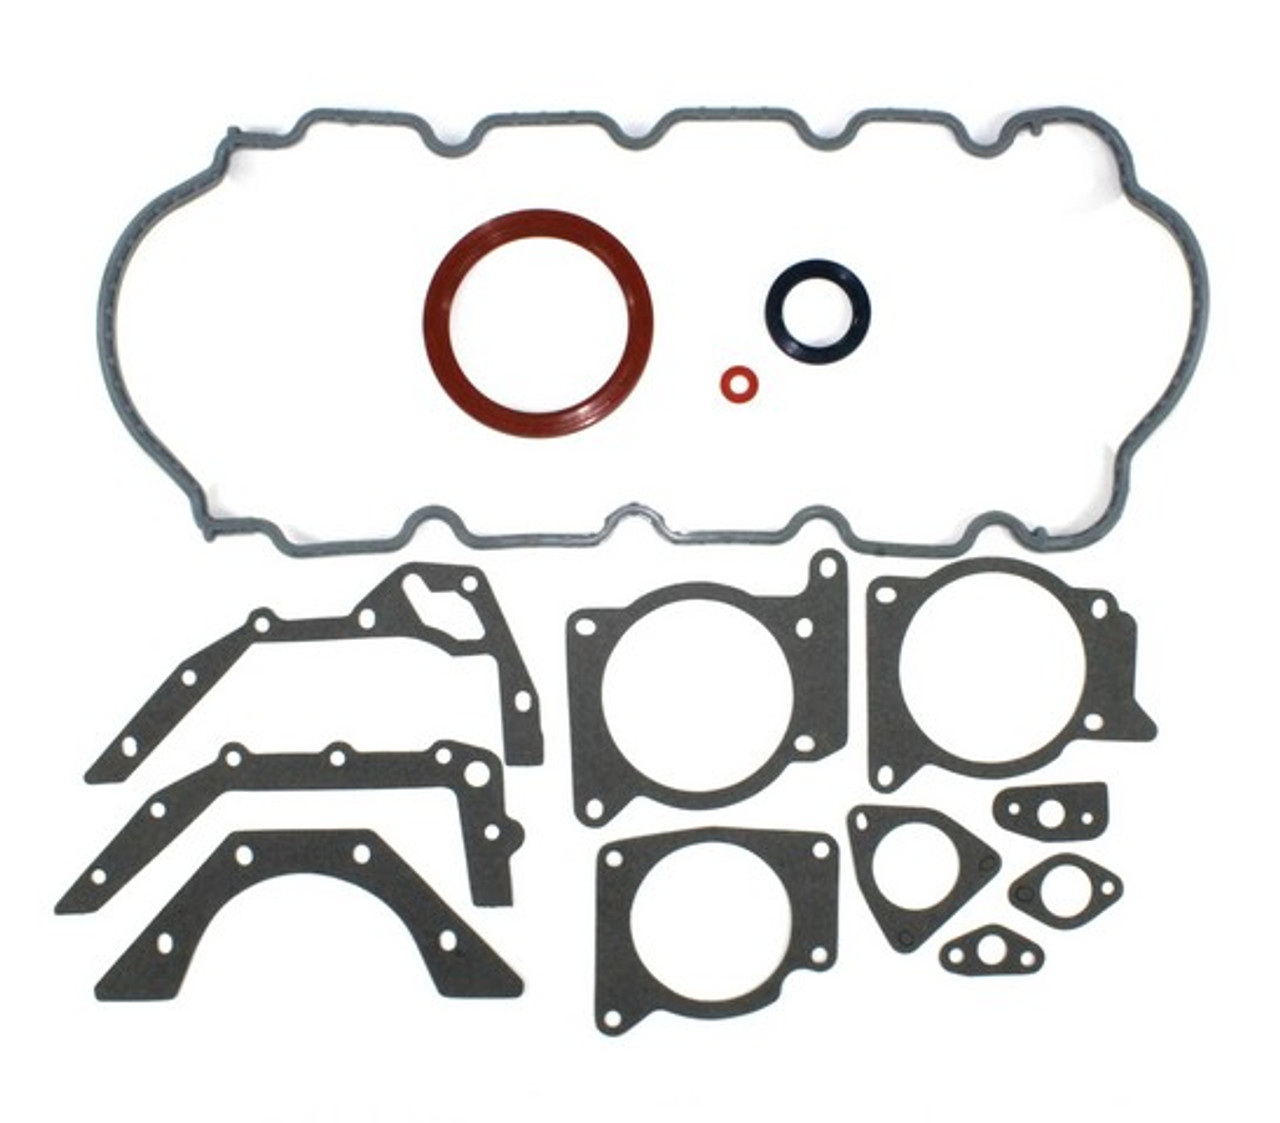 Lower Gasket Set 2.0L 2000 Ford Focus - LGS4125A.11